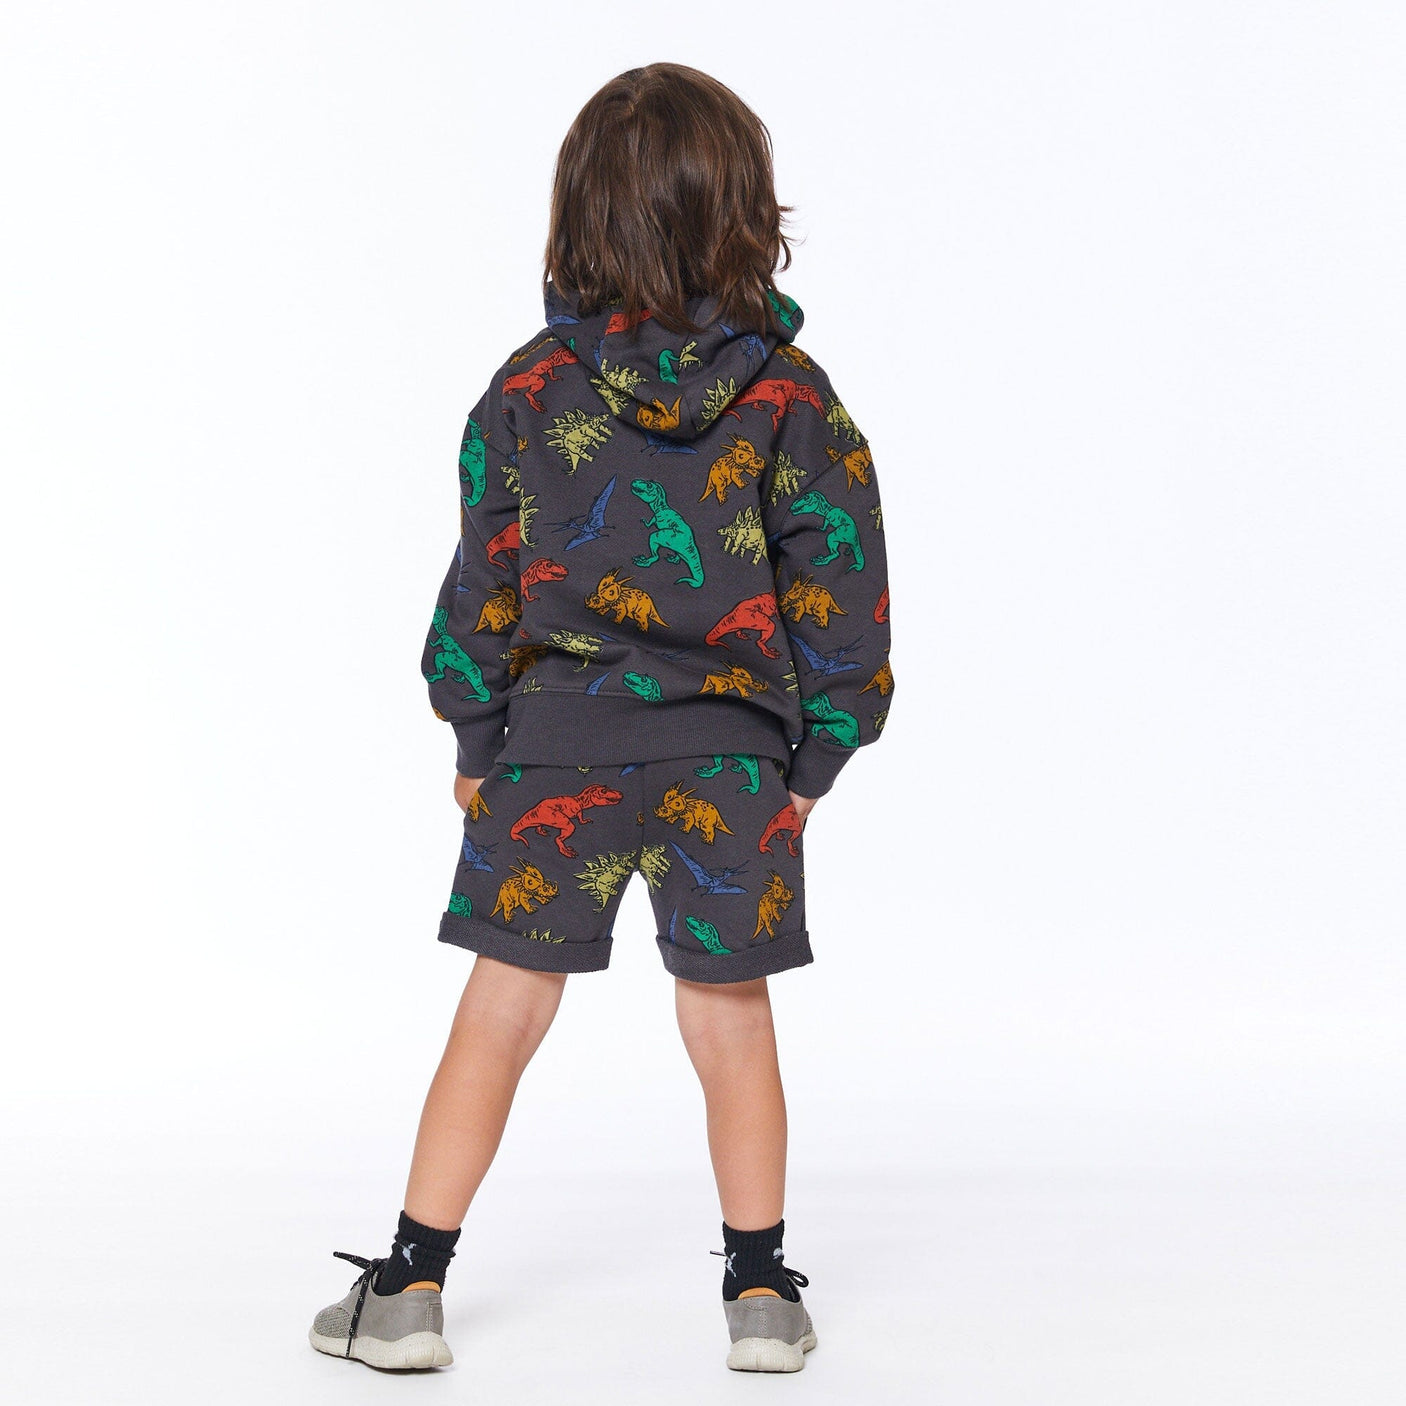 Printed French Terry Top With Hood Charcoal Grey Multicolor Dinosaurs-3